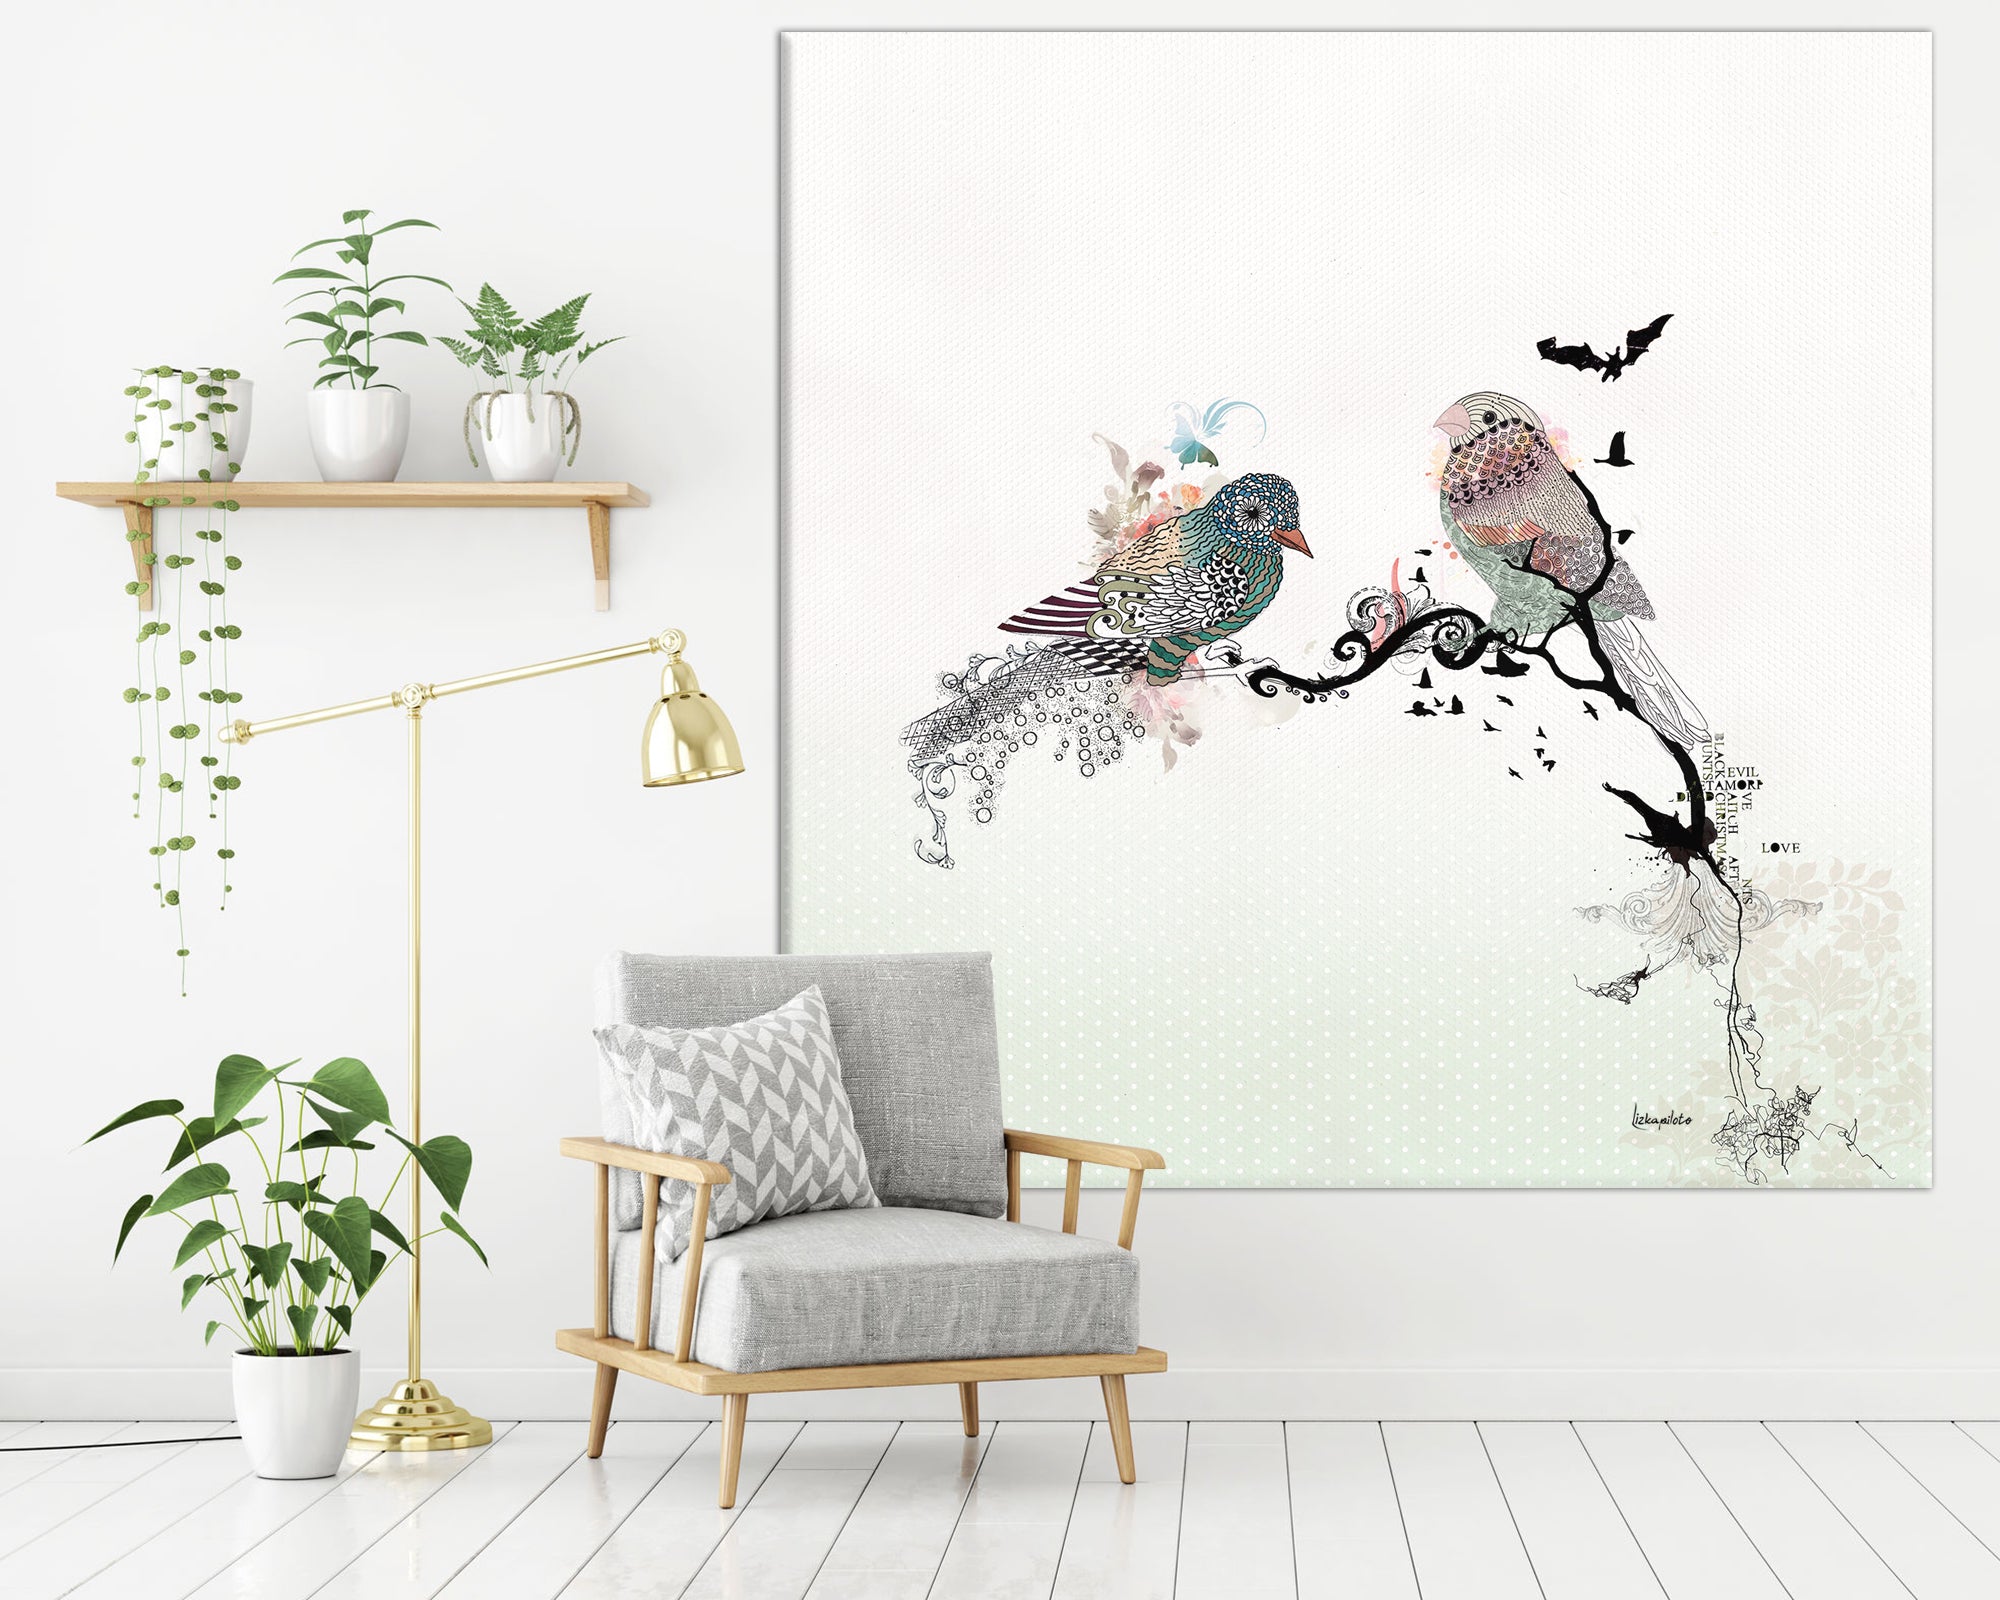 Large canvas of love birds art with soft colors like green and pink